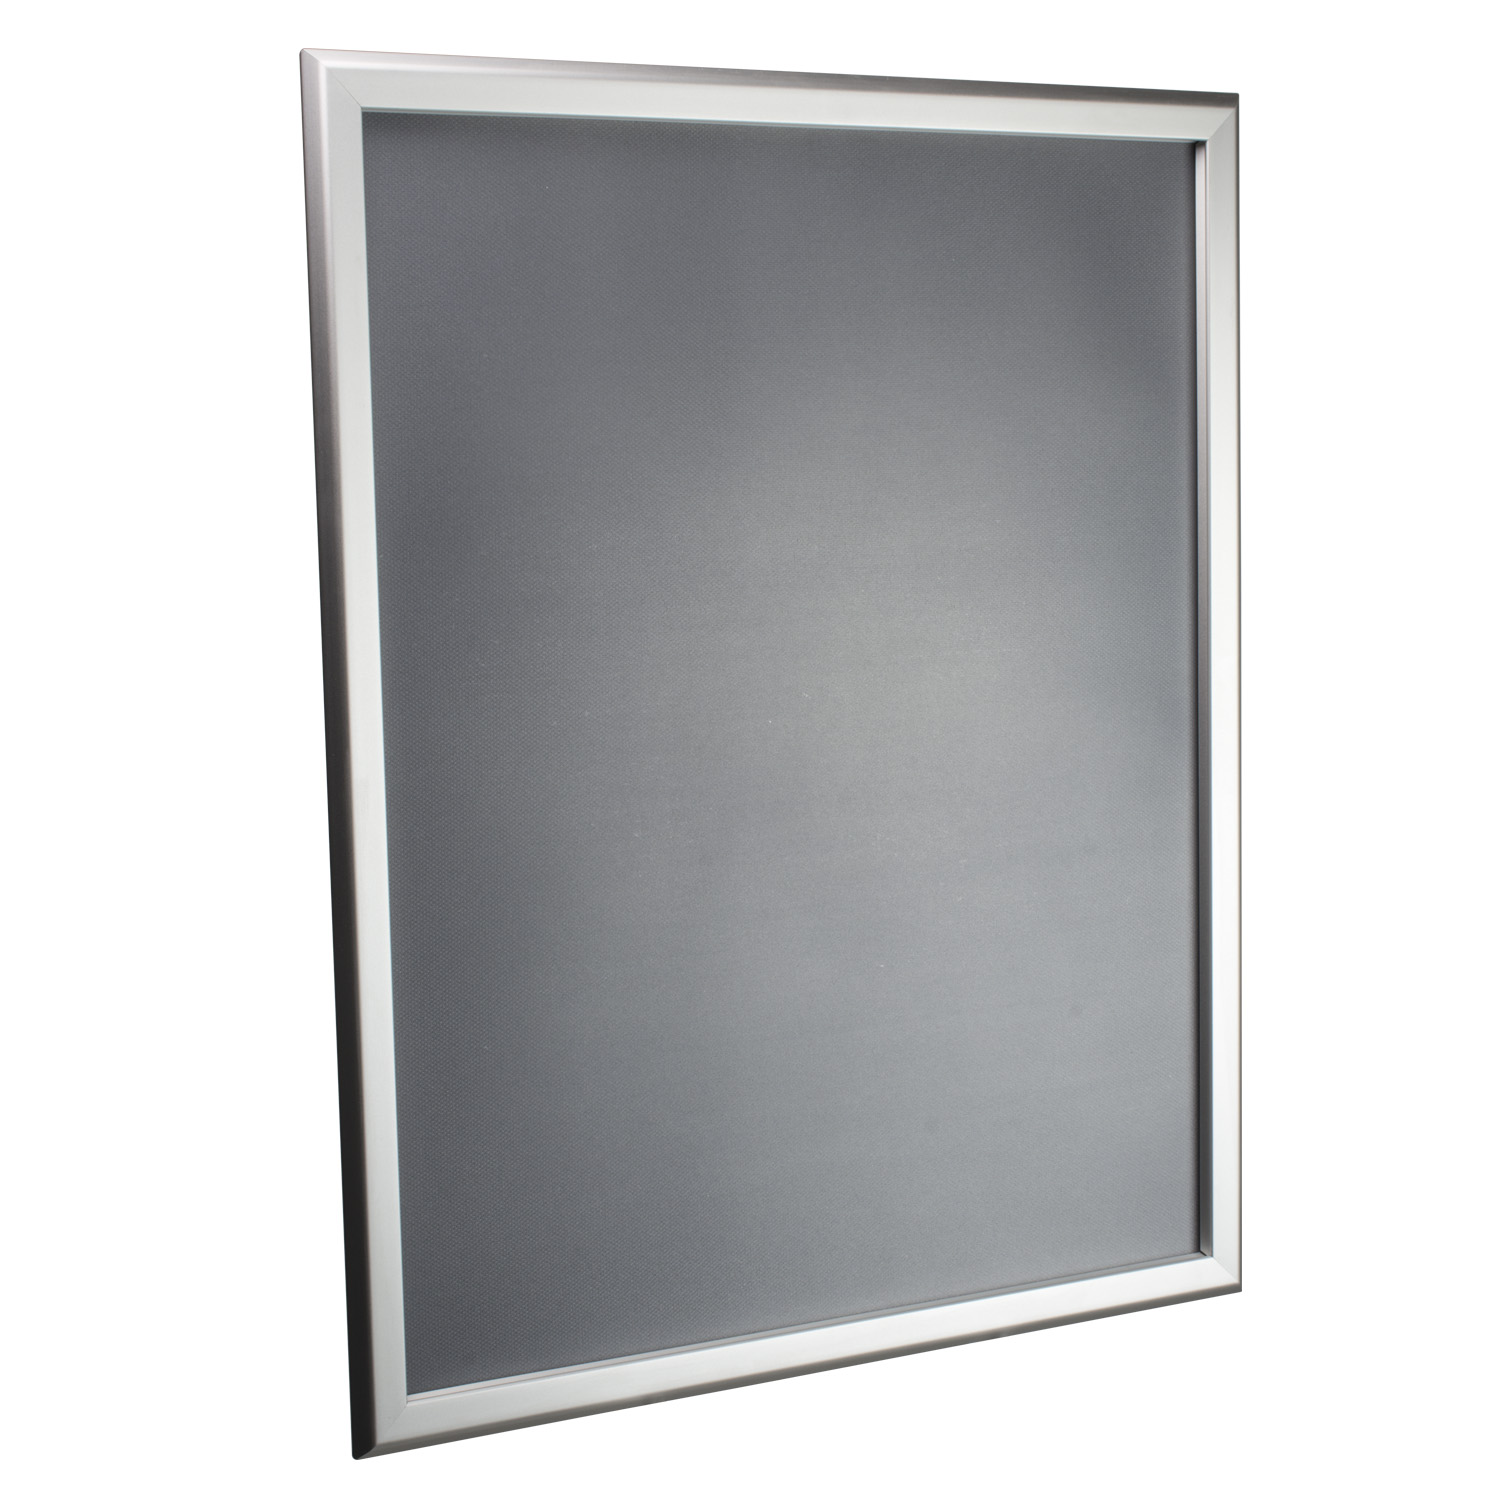 22 x 28 Snap Frame - Silver - Poster Display - shopPOPdisplays